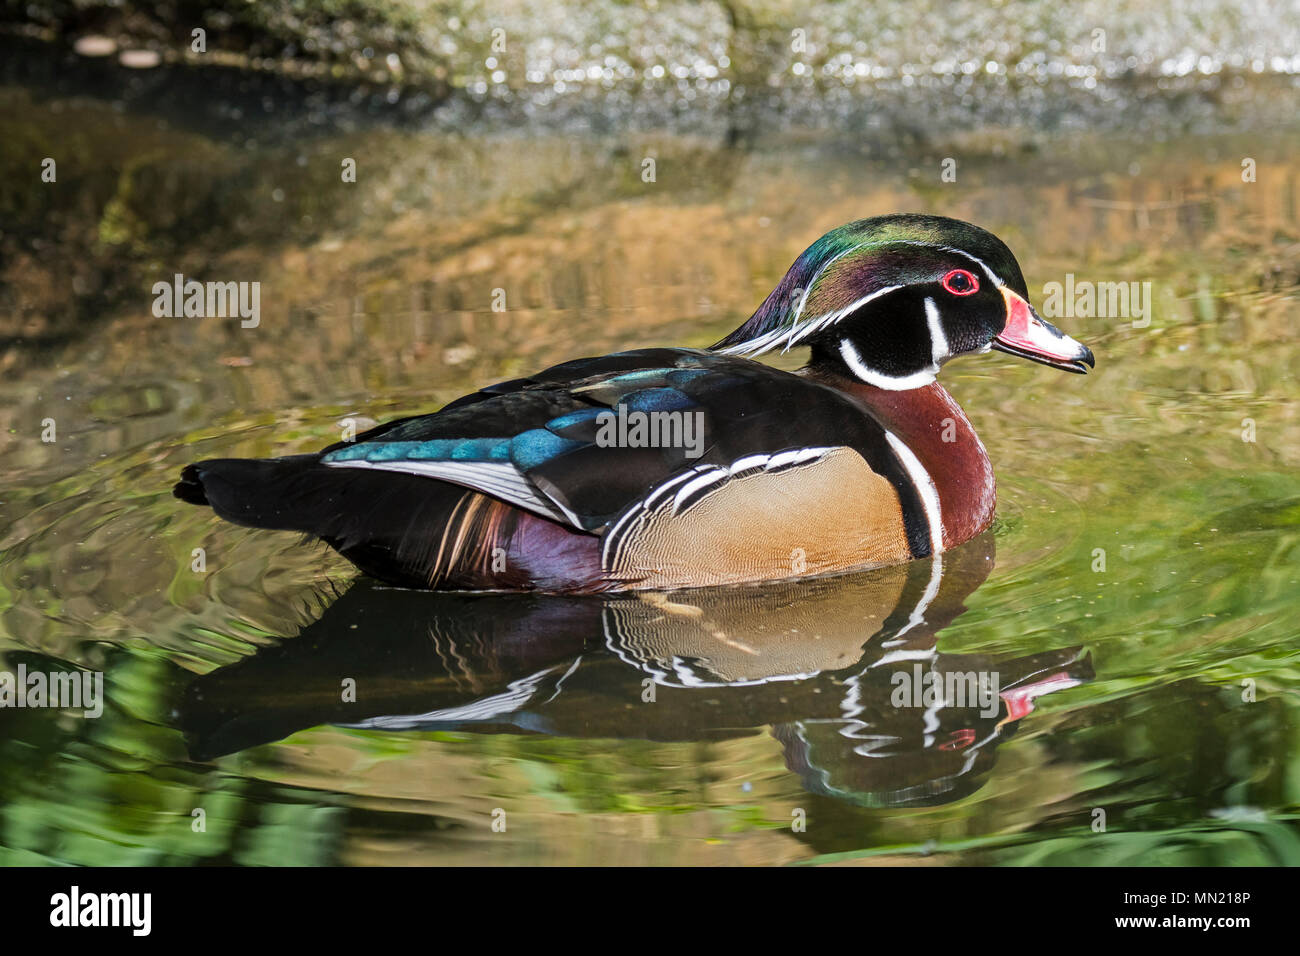 Wood duck / Carolina duck (Aix sponsa / Anas sponsa) male swimming in pond, colorful perching duck native to North America Stock Photo